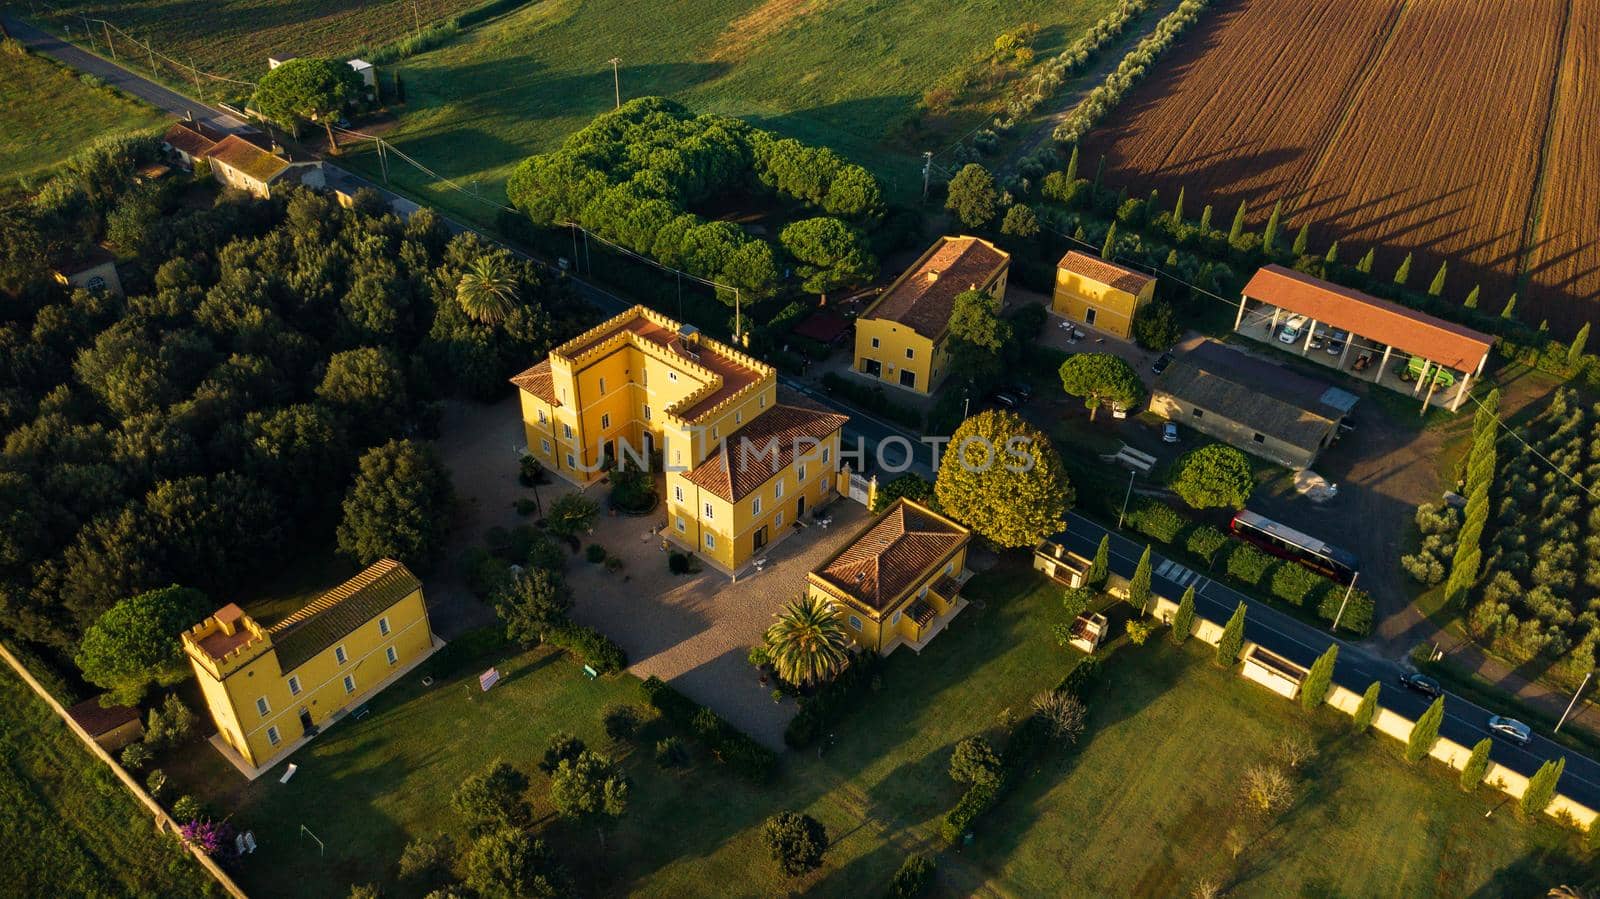 Top view of an old yellow villa in the Tuscan region.Italy.